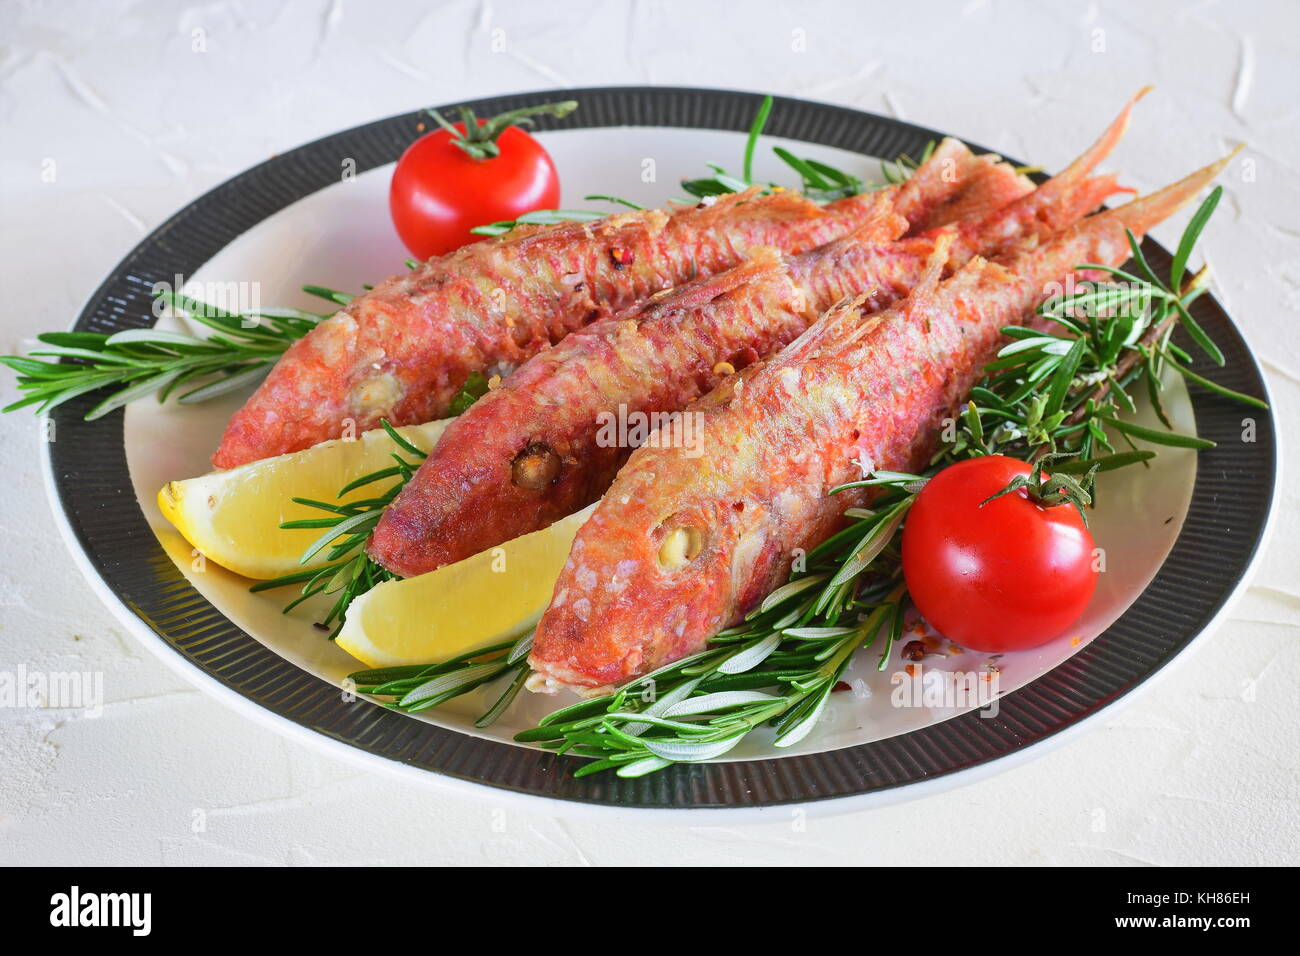 Grilled red mullet in a plate with herbs, tomato and lemon. Healthy food. Mediterranean lifestyle. Stock Photo